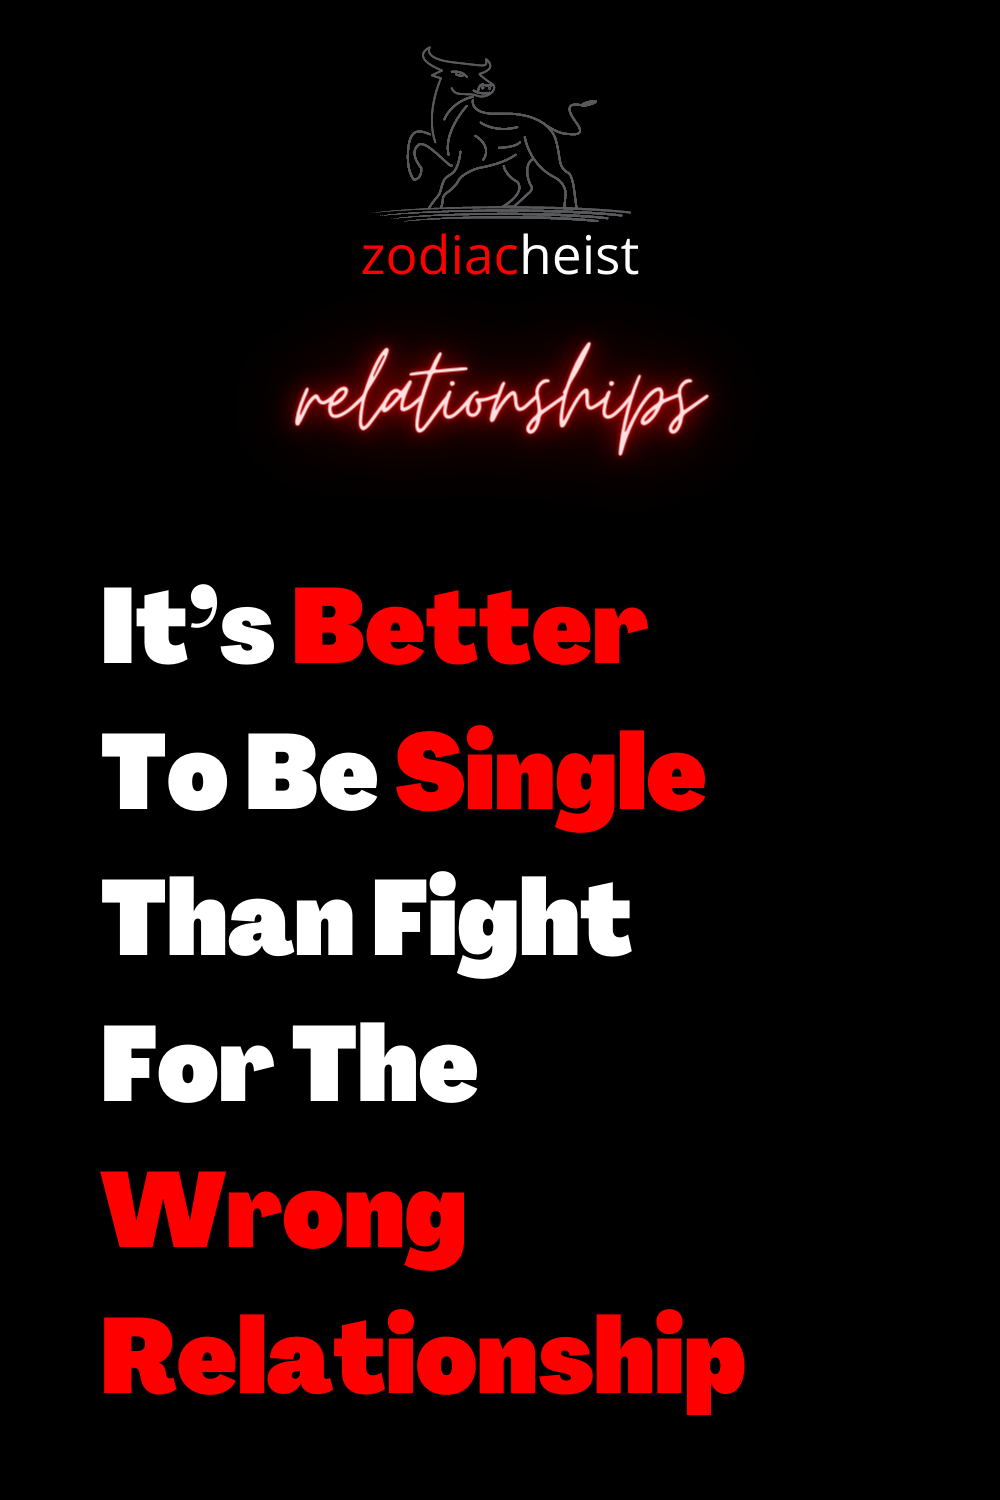 It’s Better To Be Single Than Fight For The Wrong Relationship